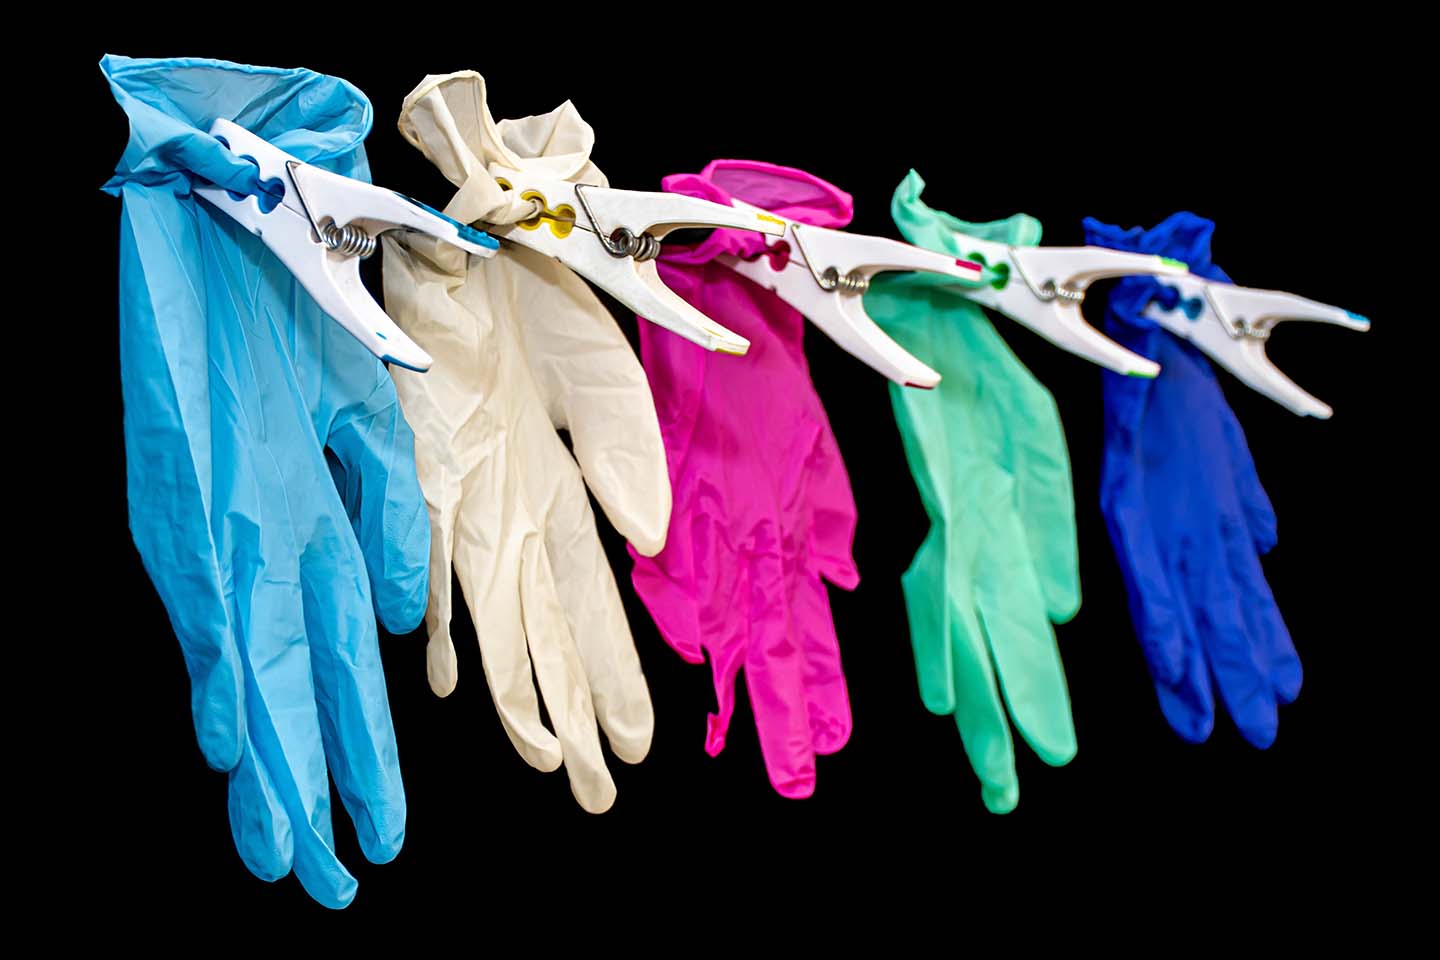 Five differently colored surgical gloves pinned to a wall against a black background: sky blue, white, pink, green, and blue.